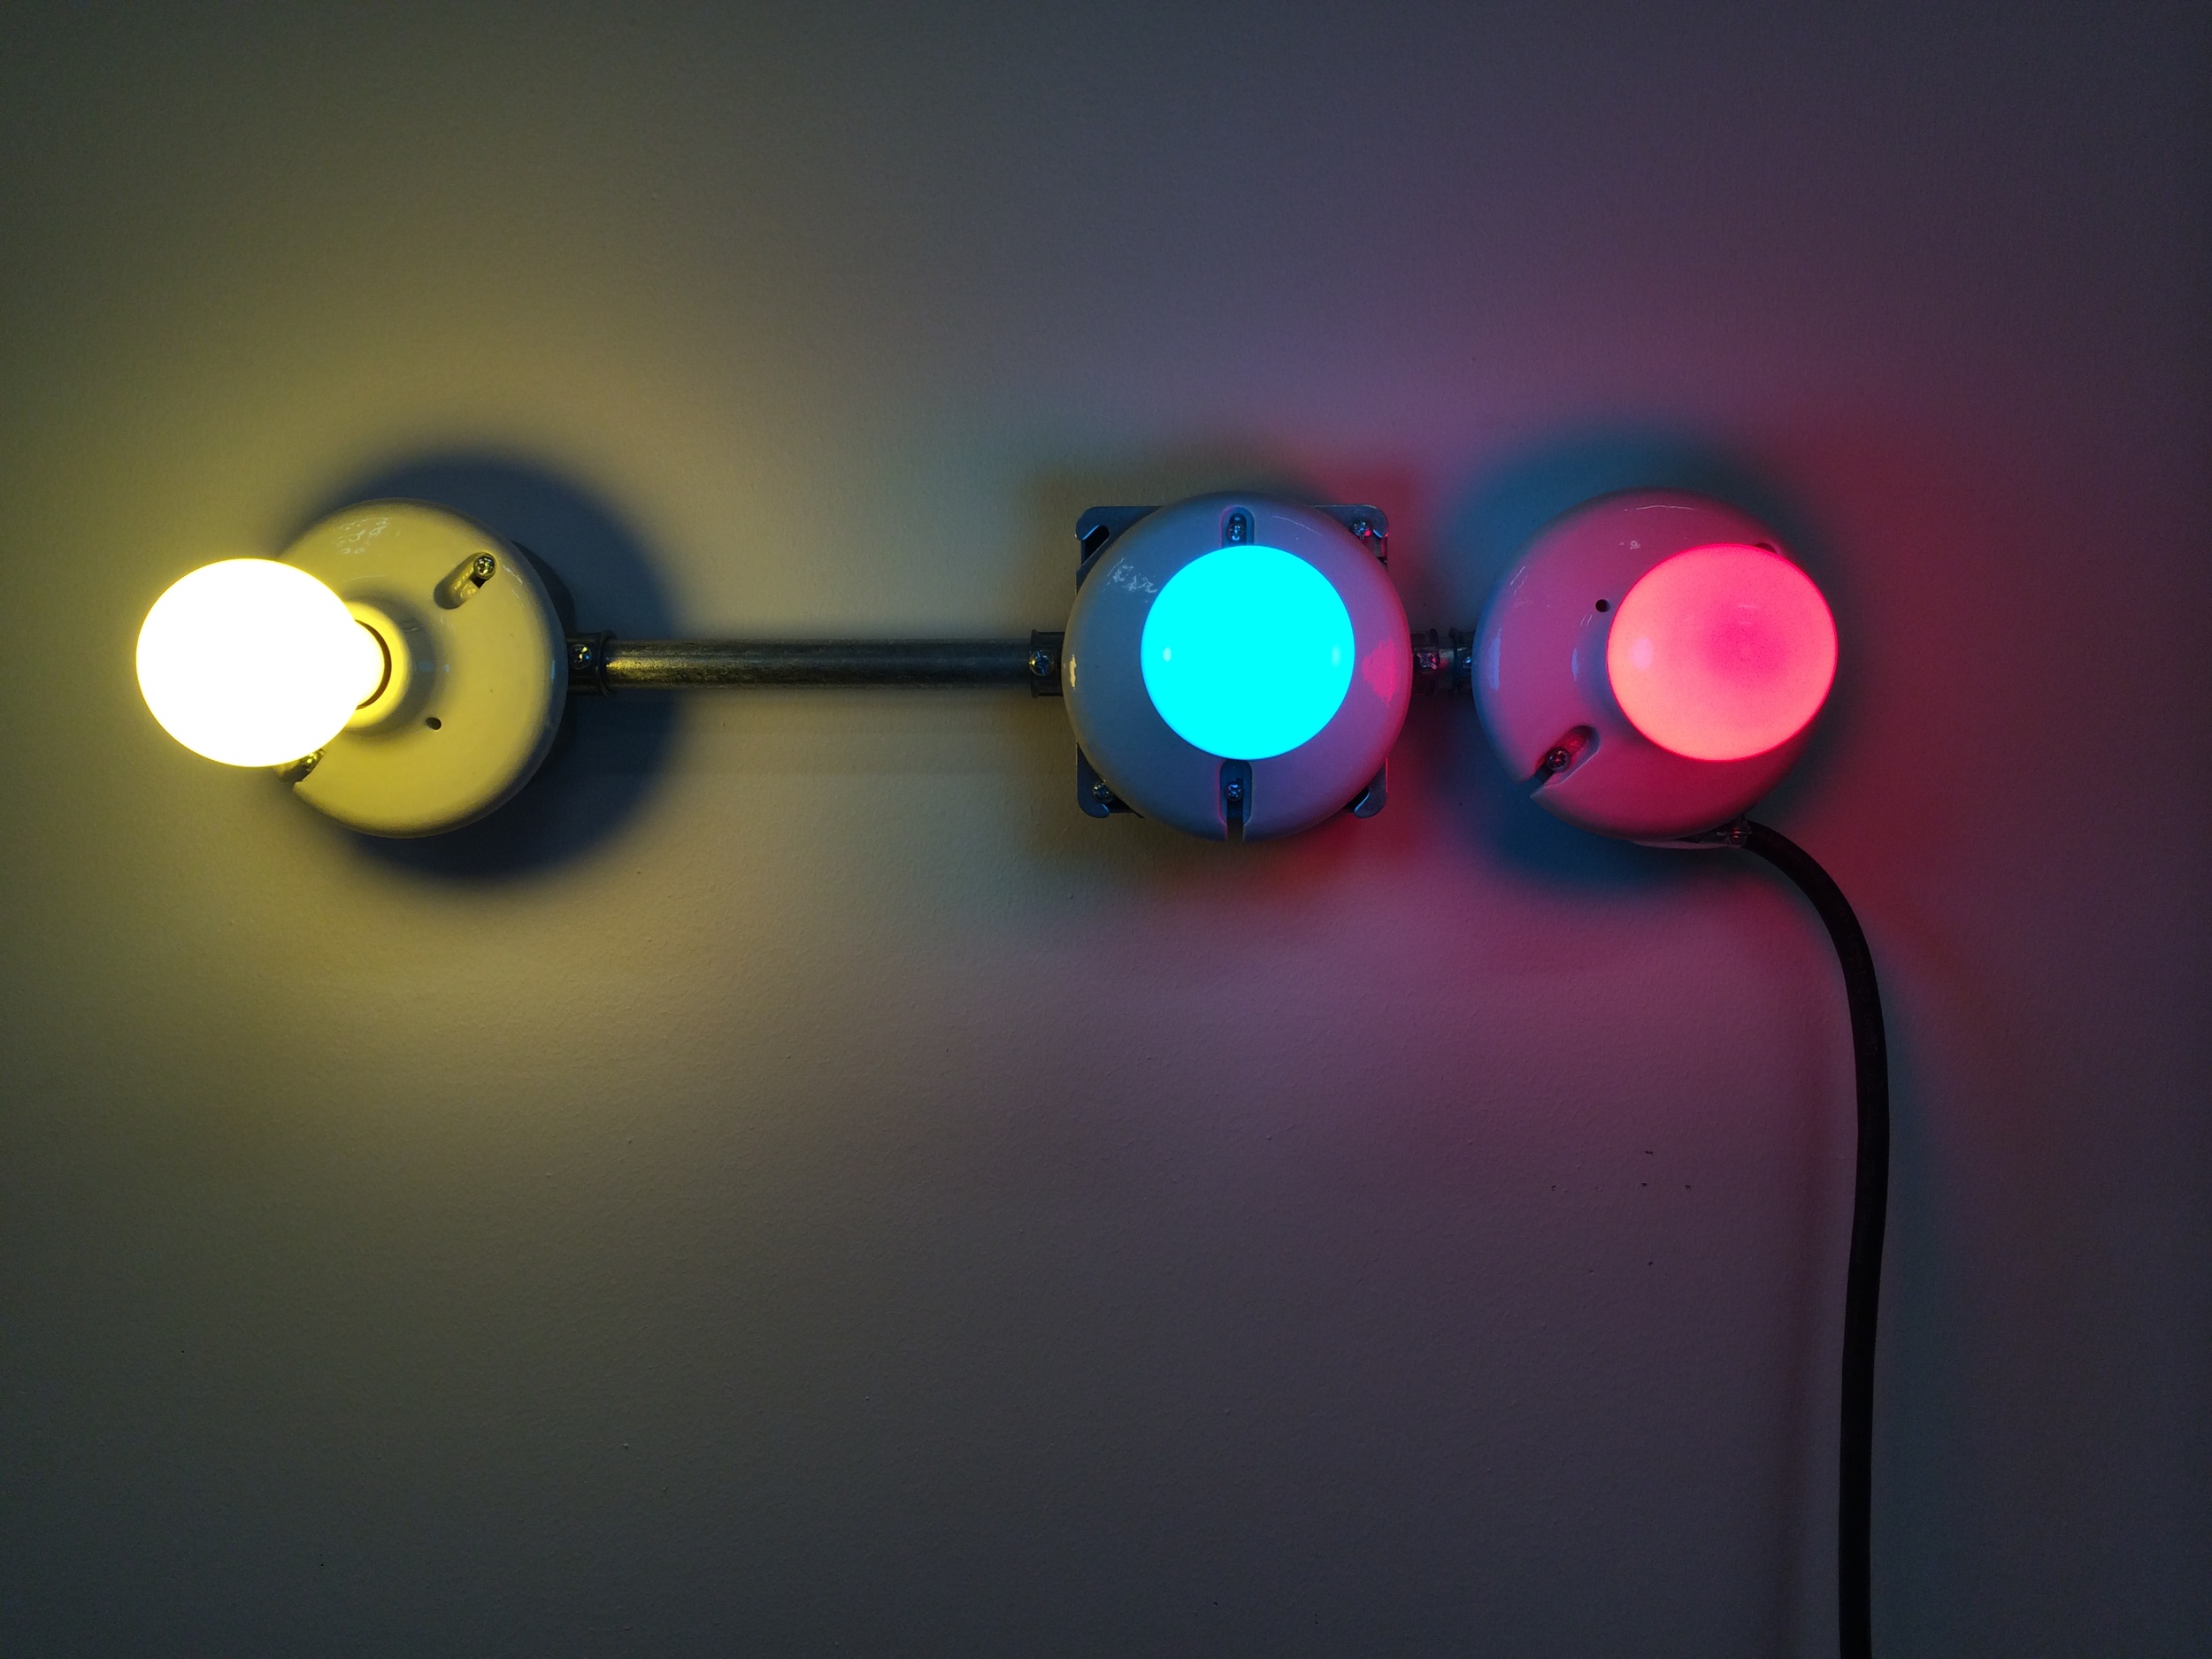   Conduits in Red, Yellow and Blue (Figure 29)  , 2014.&nbsp;Galvanized steel, copper wire, porcelain fixtures and ceramic coated light bulbs.  